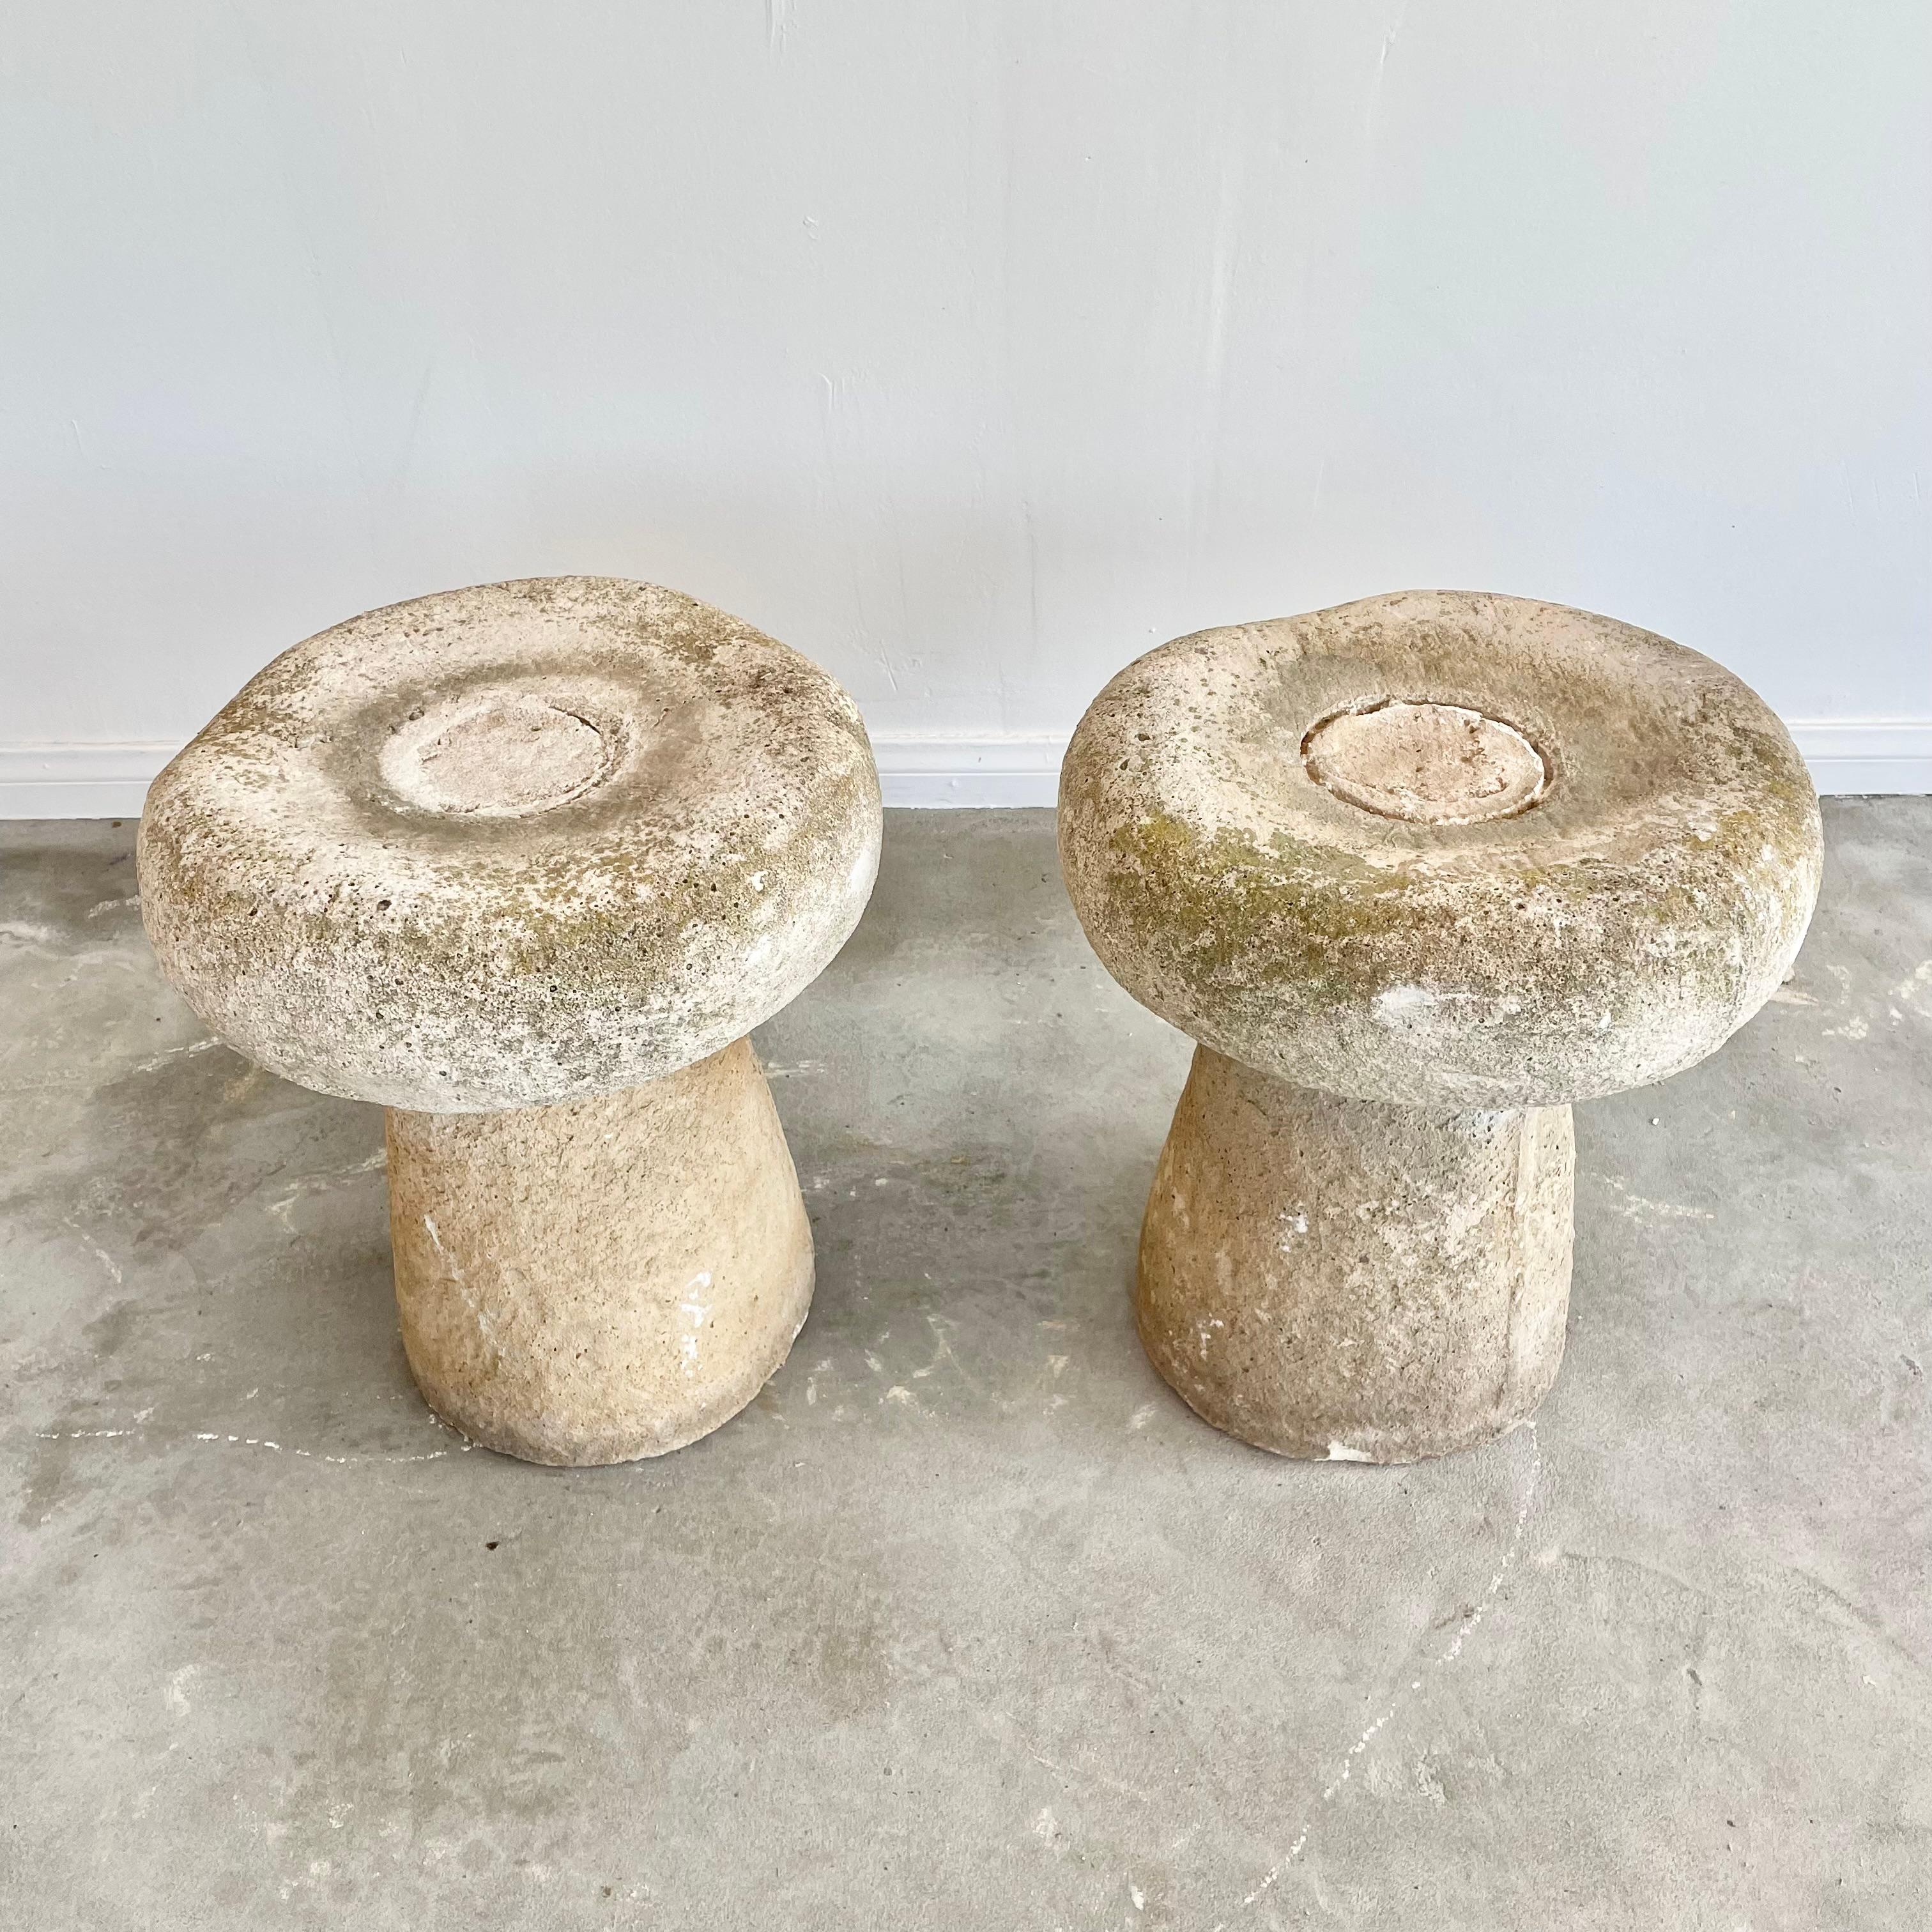 Stunning French concrete mushroom stools, circa 1970s. Fun and unique design with a concrete base resembling a mushroom stem and a concrete seat which resembles a mushroom cap. Great for outdoor or indoor use. Light wear and patina gives each seat a